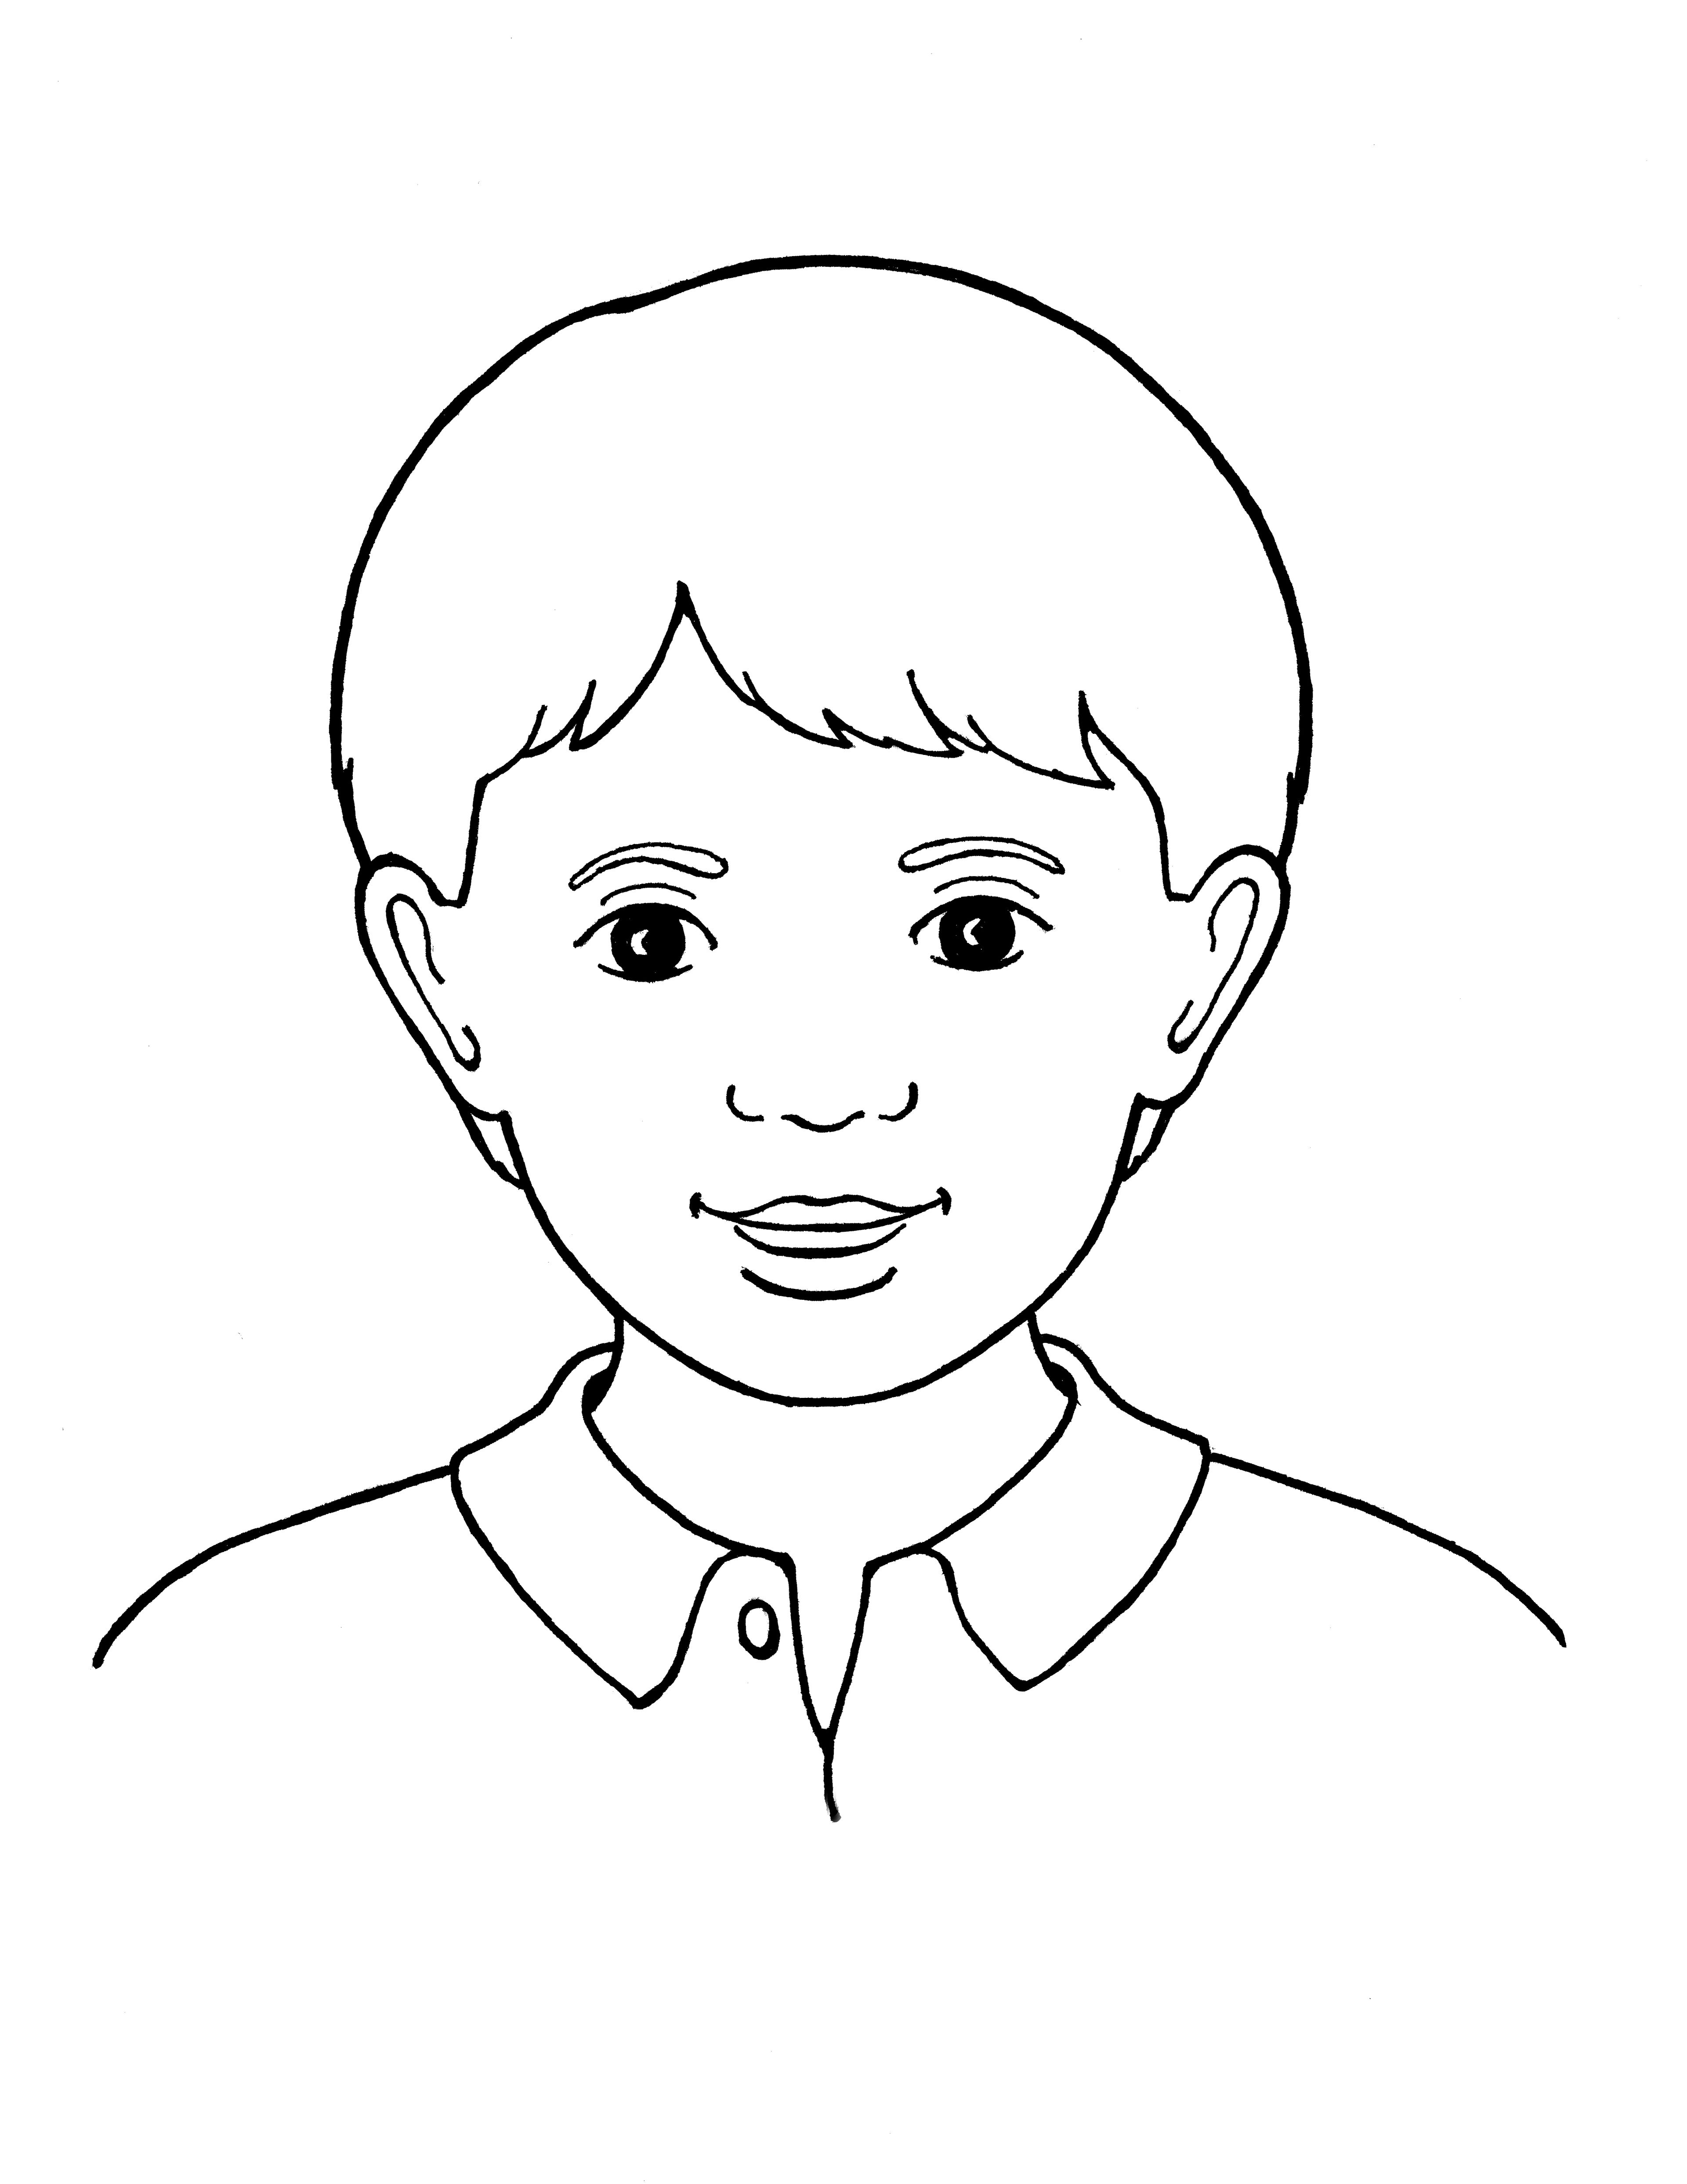 A line drawing of a young Primary boy with brown eyes.